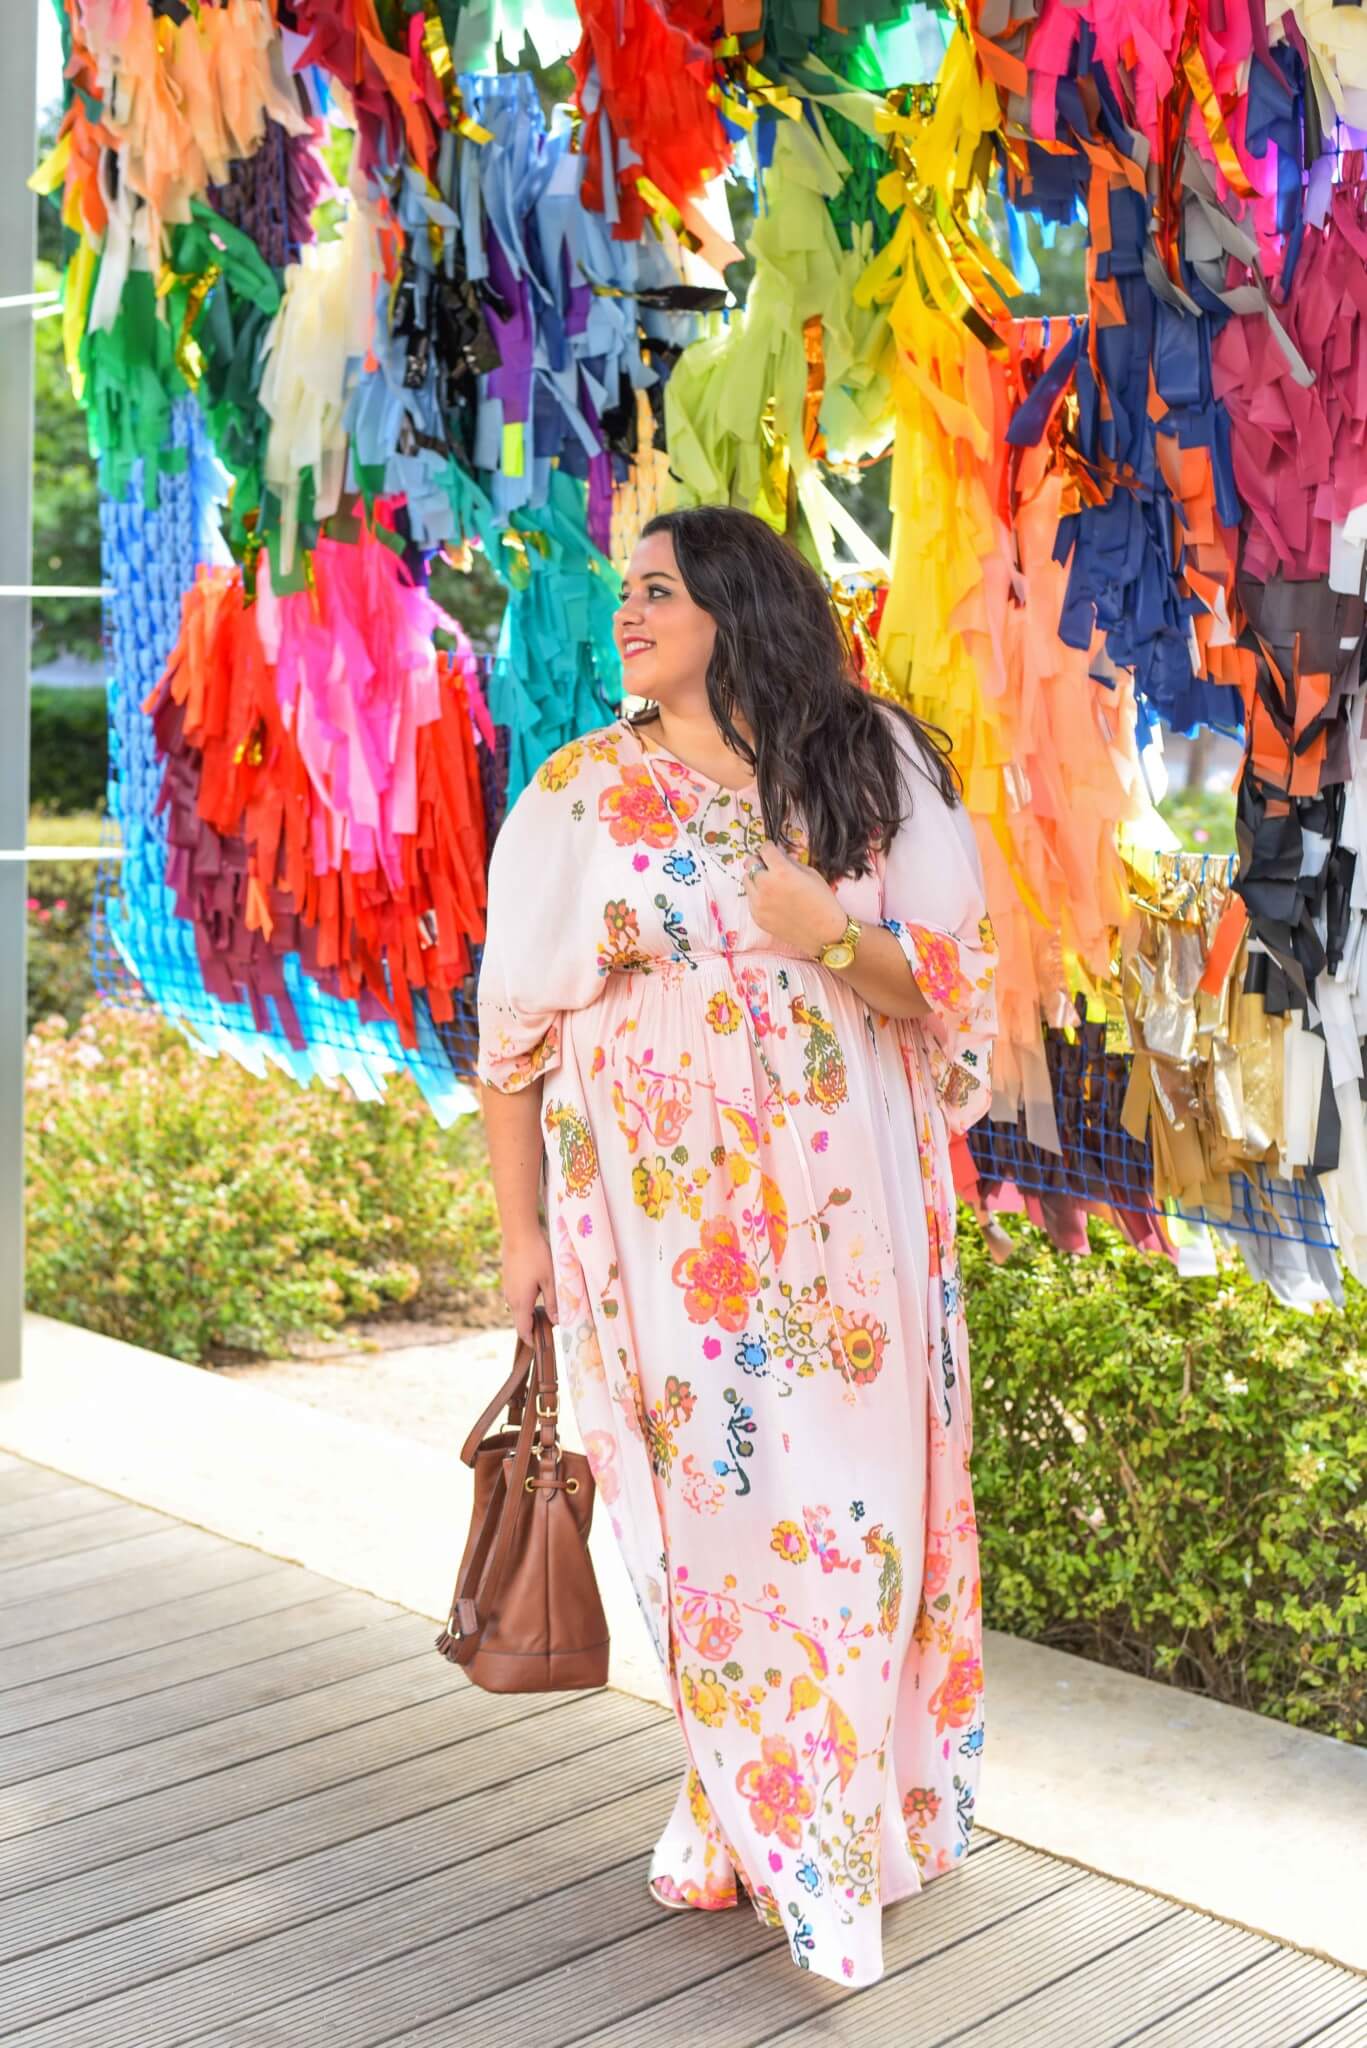 When looking for a maxi dress to include in my curvy closet, I always look for something that can easily transition from day to night. This plus size maxi dress from my Gwynnie Bee clothing subscription was perfect for roaming around Houston. #plussizefashion #plussizedresses